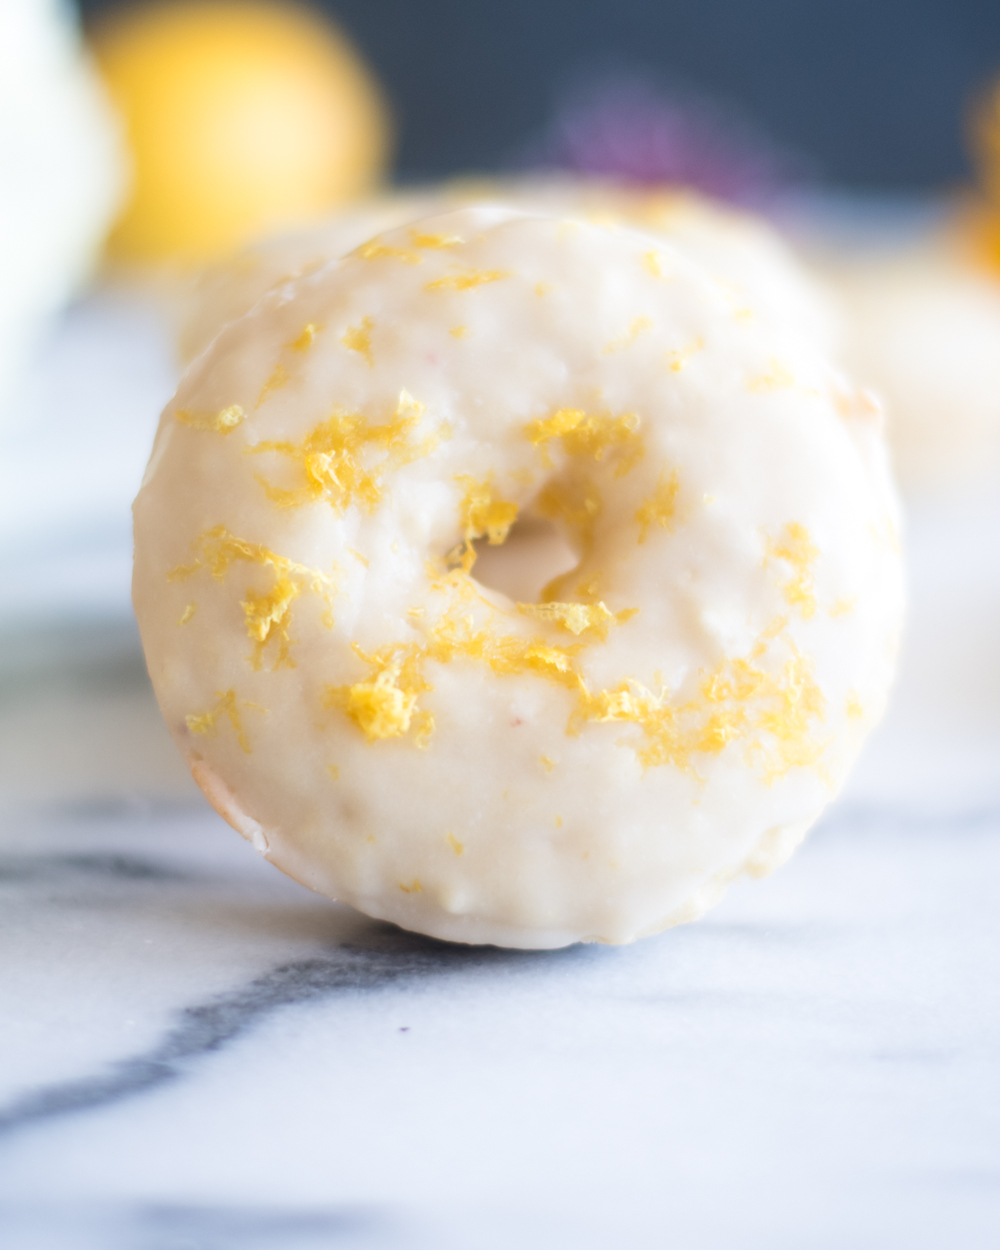 These donuts are perfect for spring. They are great for serving for breakfast, an afternoon treat or served at a springtime brunch!